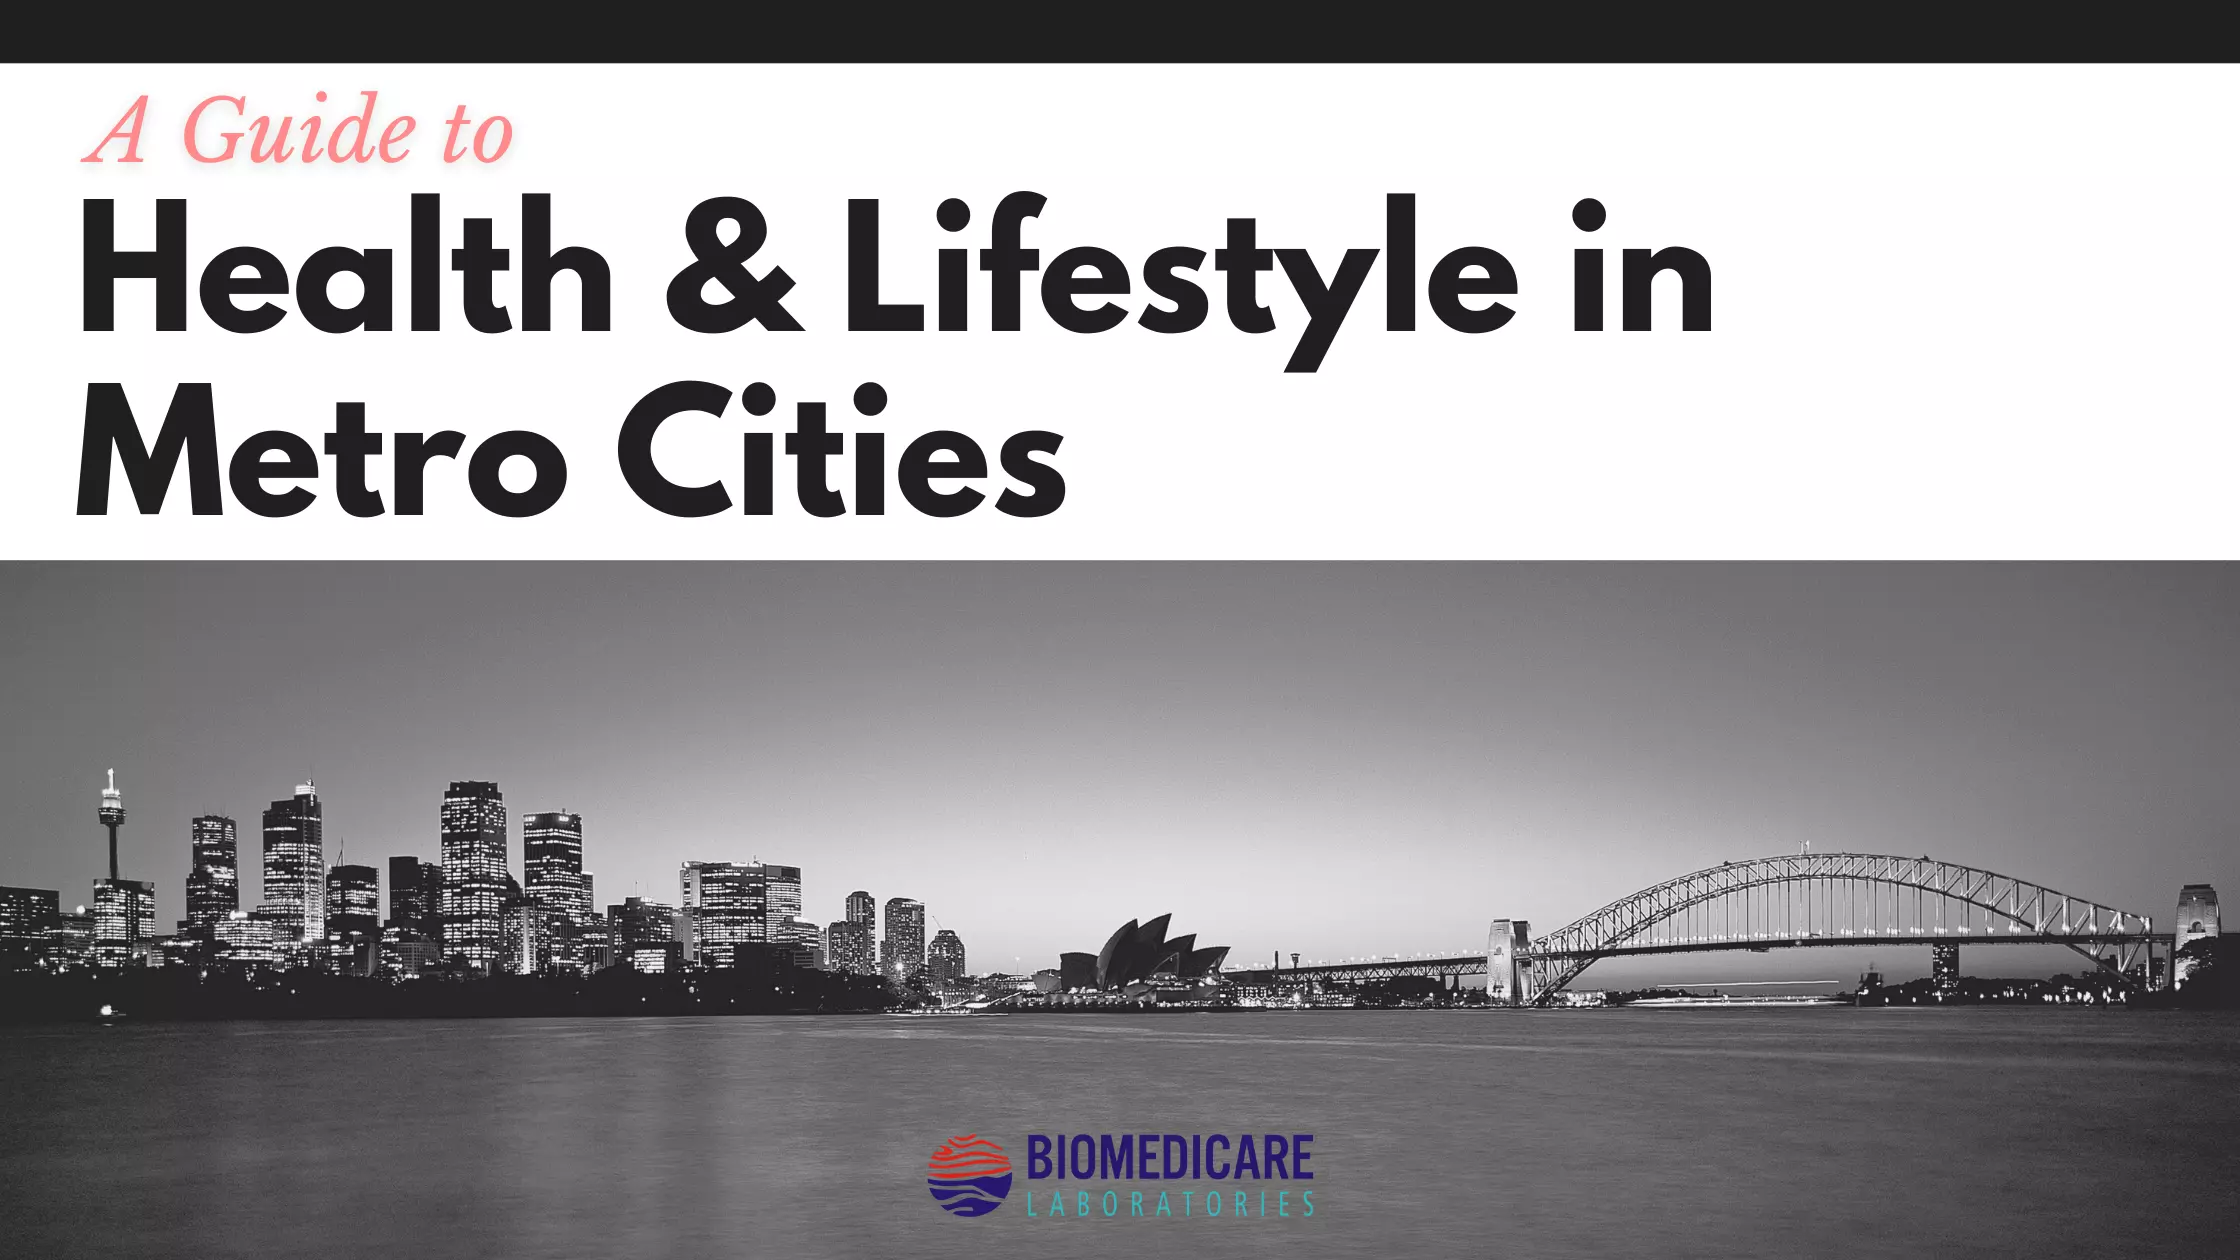 A Guide to Health & Lifestyle in Metro Cities